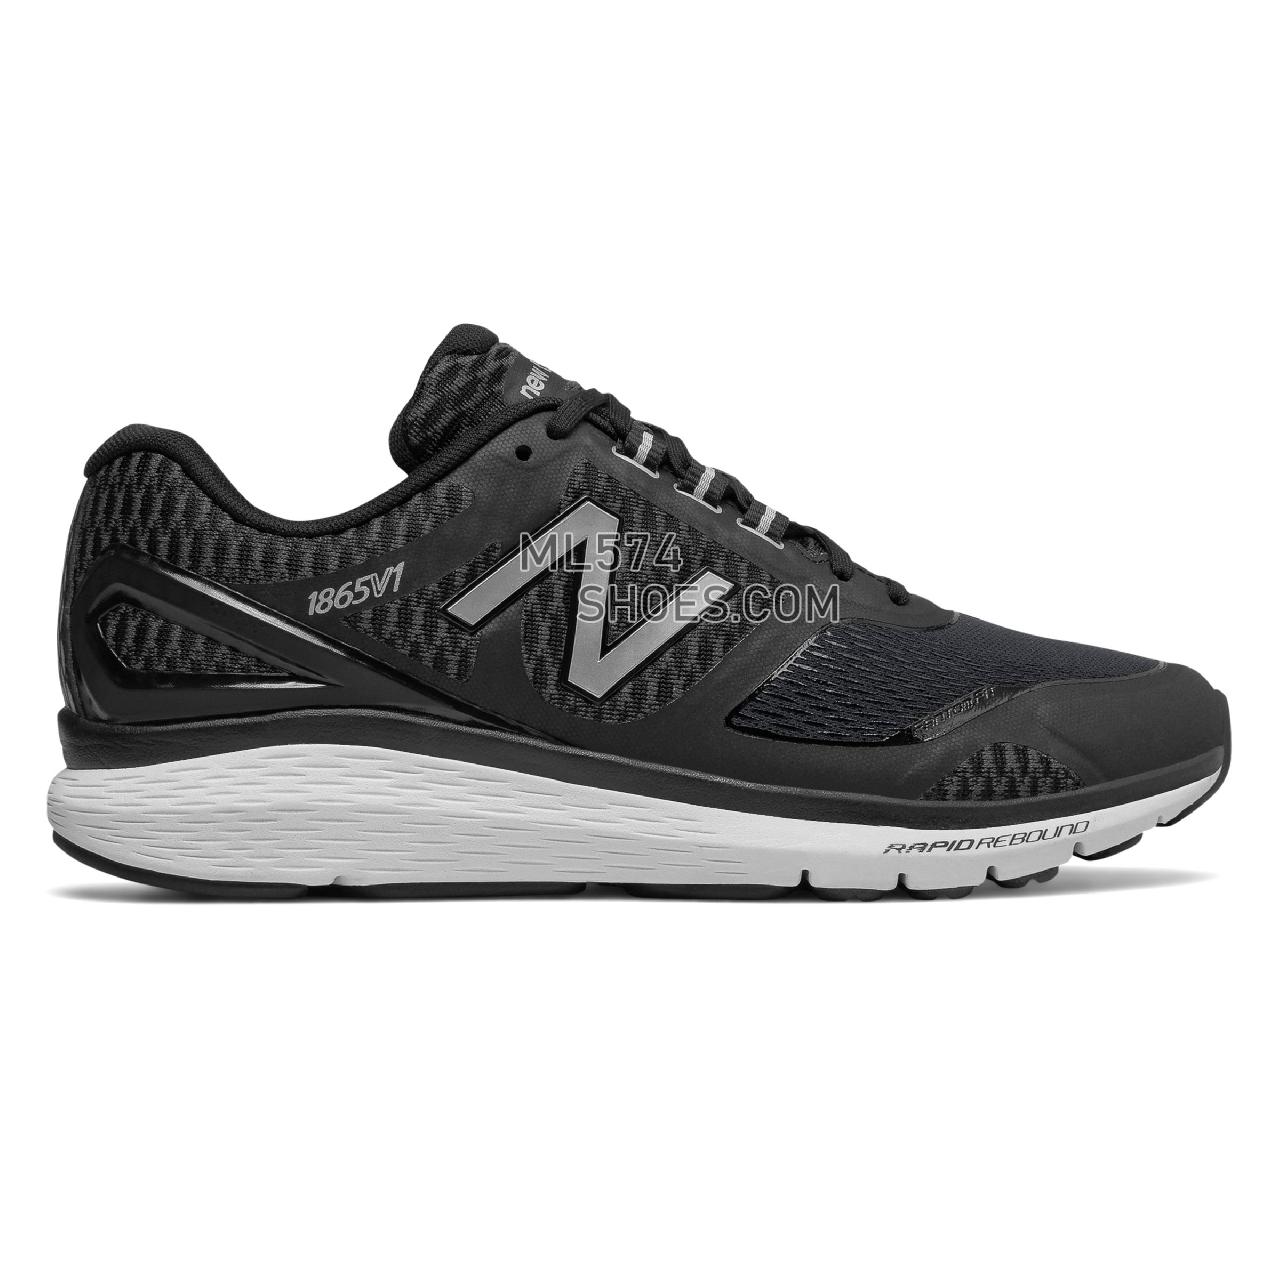 New Balance 1865 - Men's 1865 - Walking Black with Silver - MW1865BS